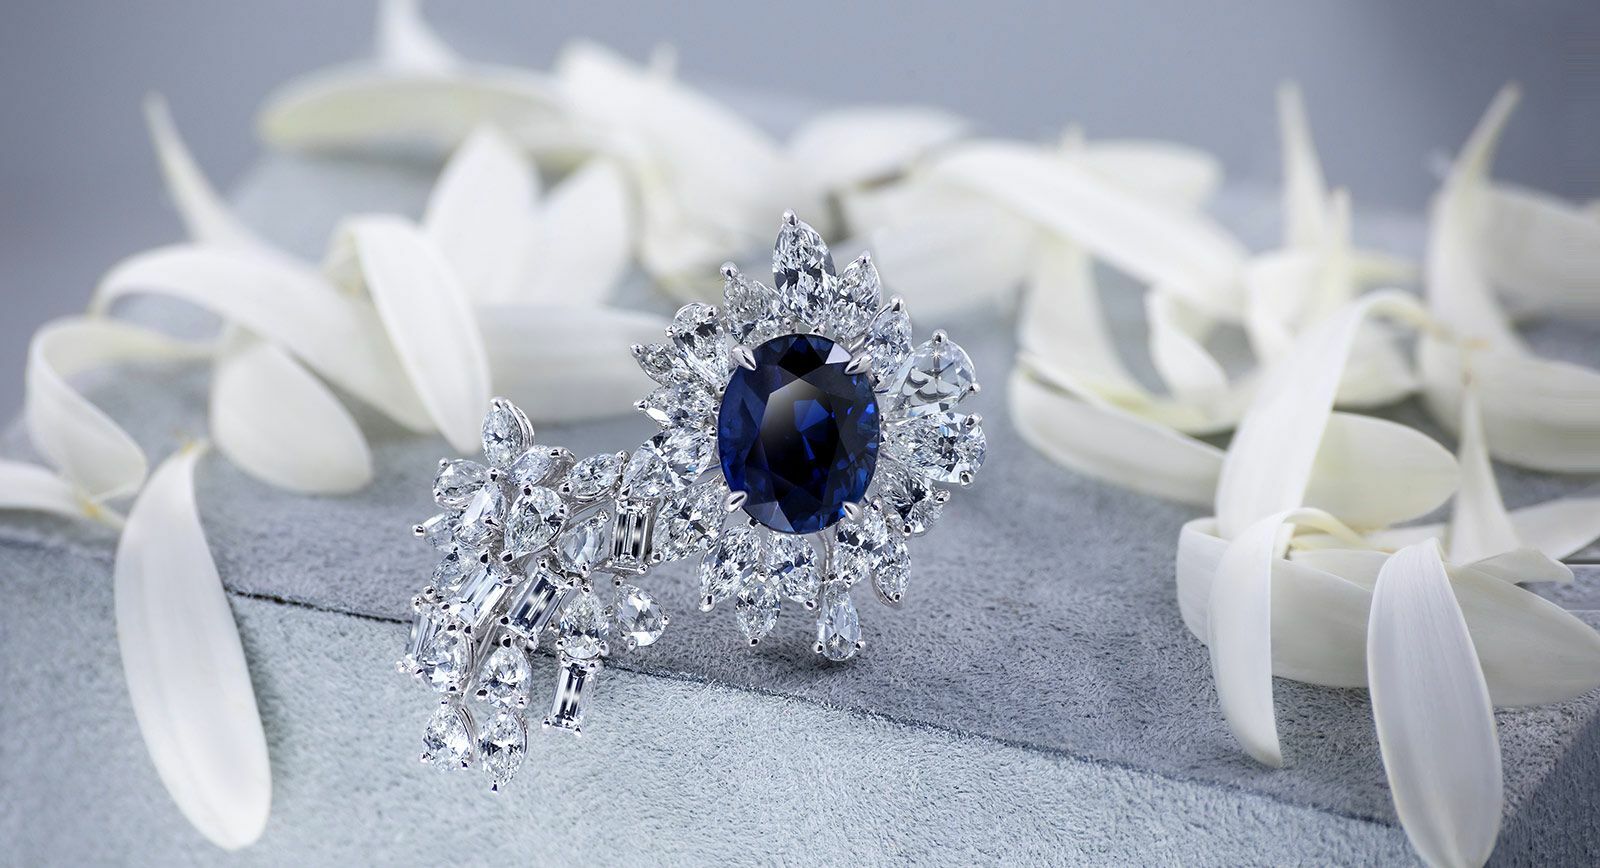 QIU Fine Jewelry ring with an 8.08 carat unheated Burmese Royal Blue sapphire and 8 carats of diamonds